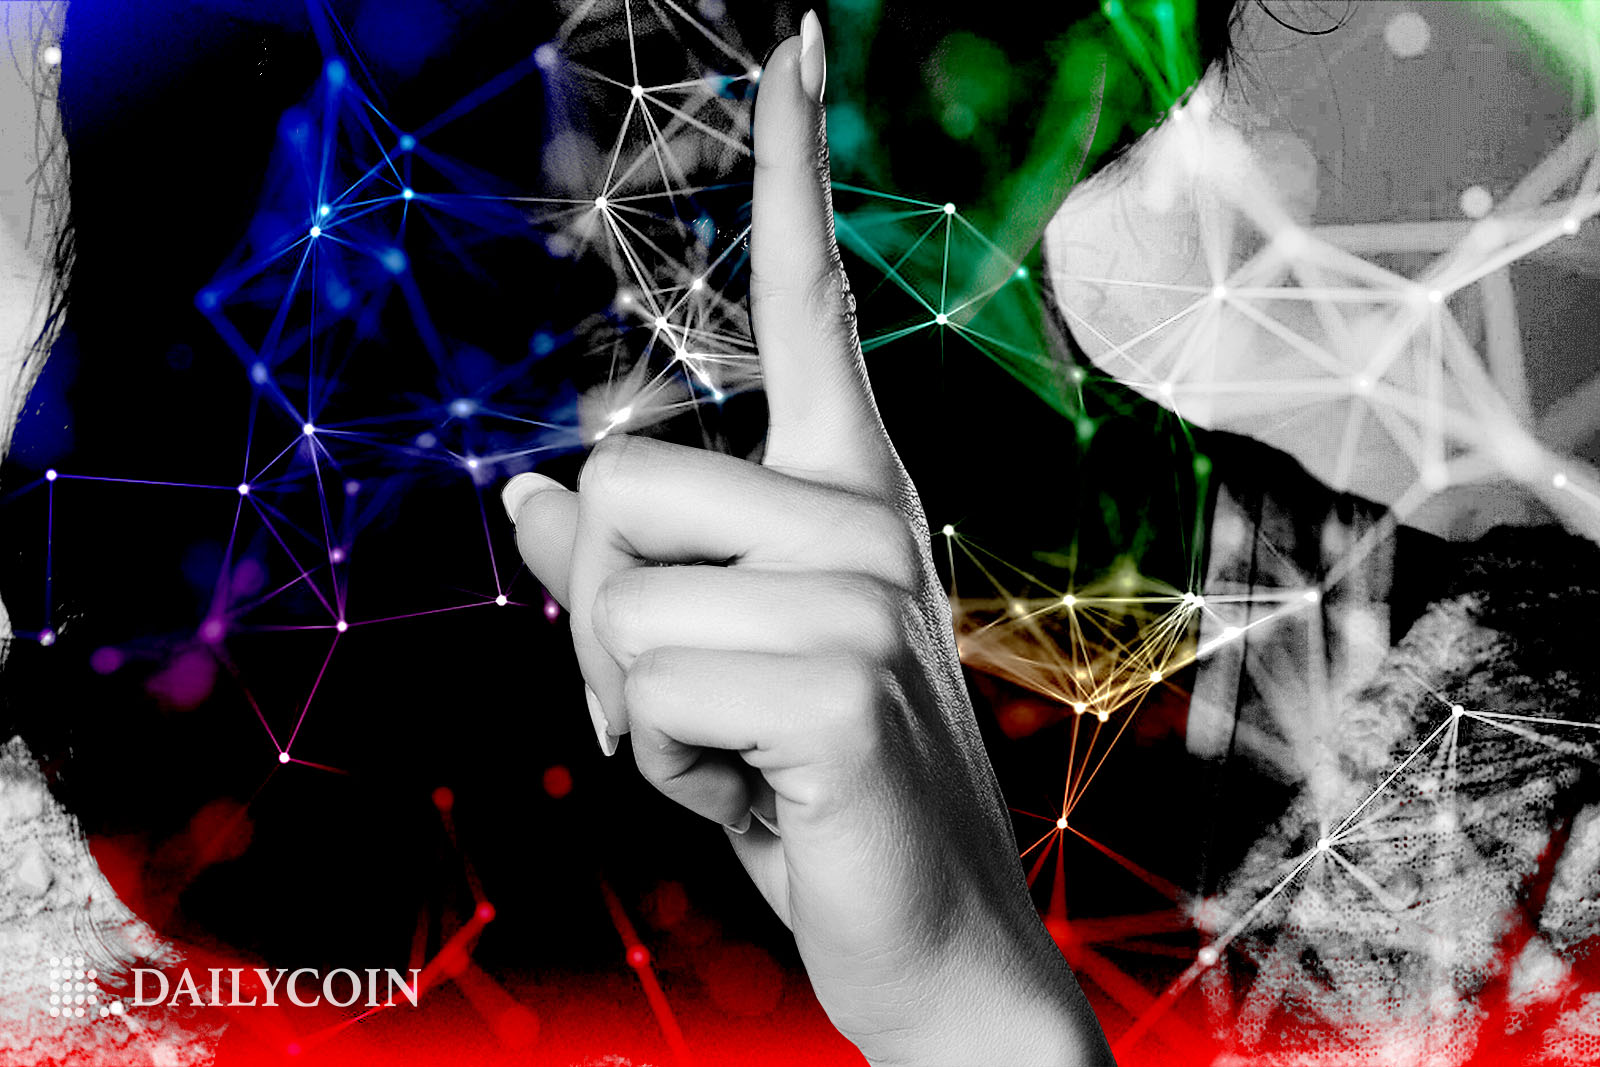 A colorful image of cryptographic shapes highlights a hand with its index finger up.